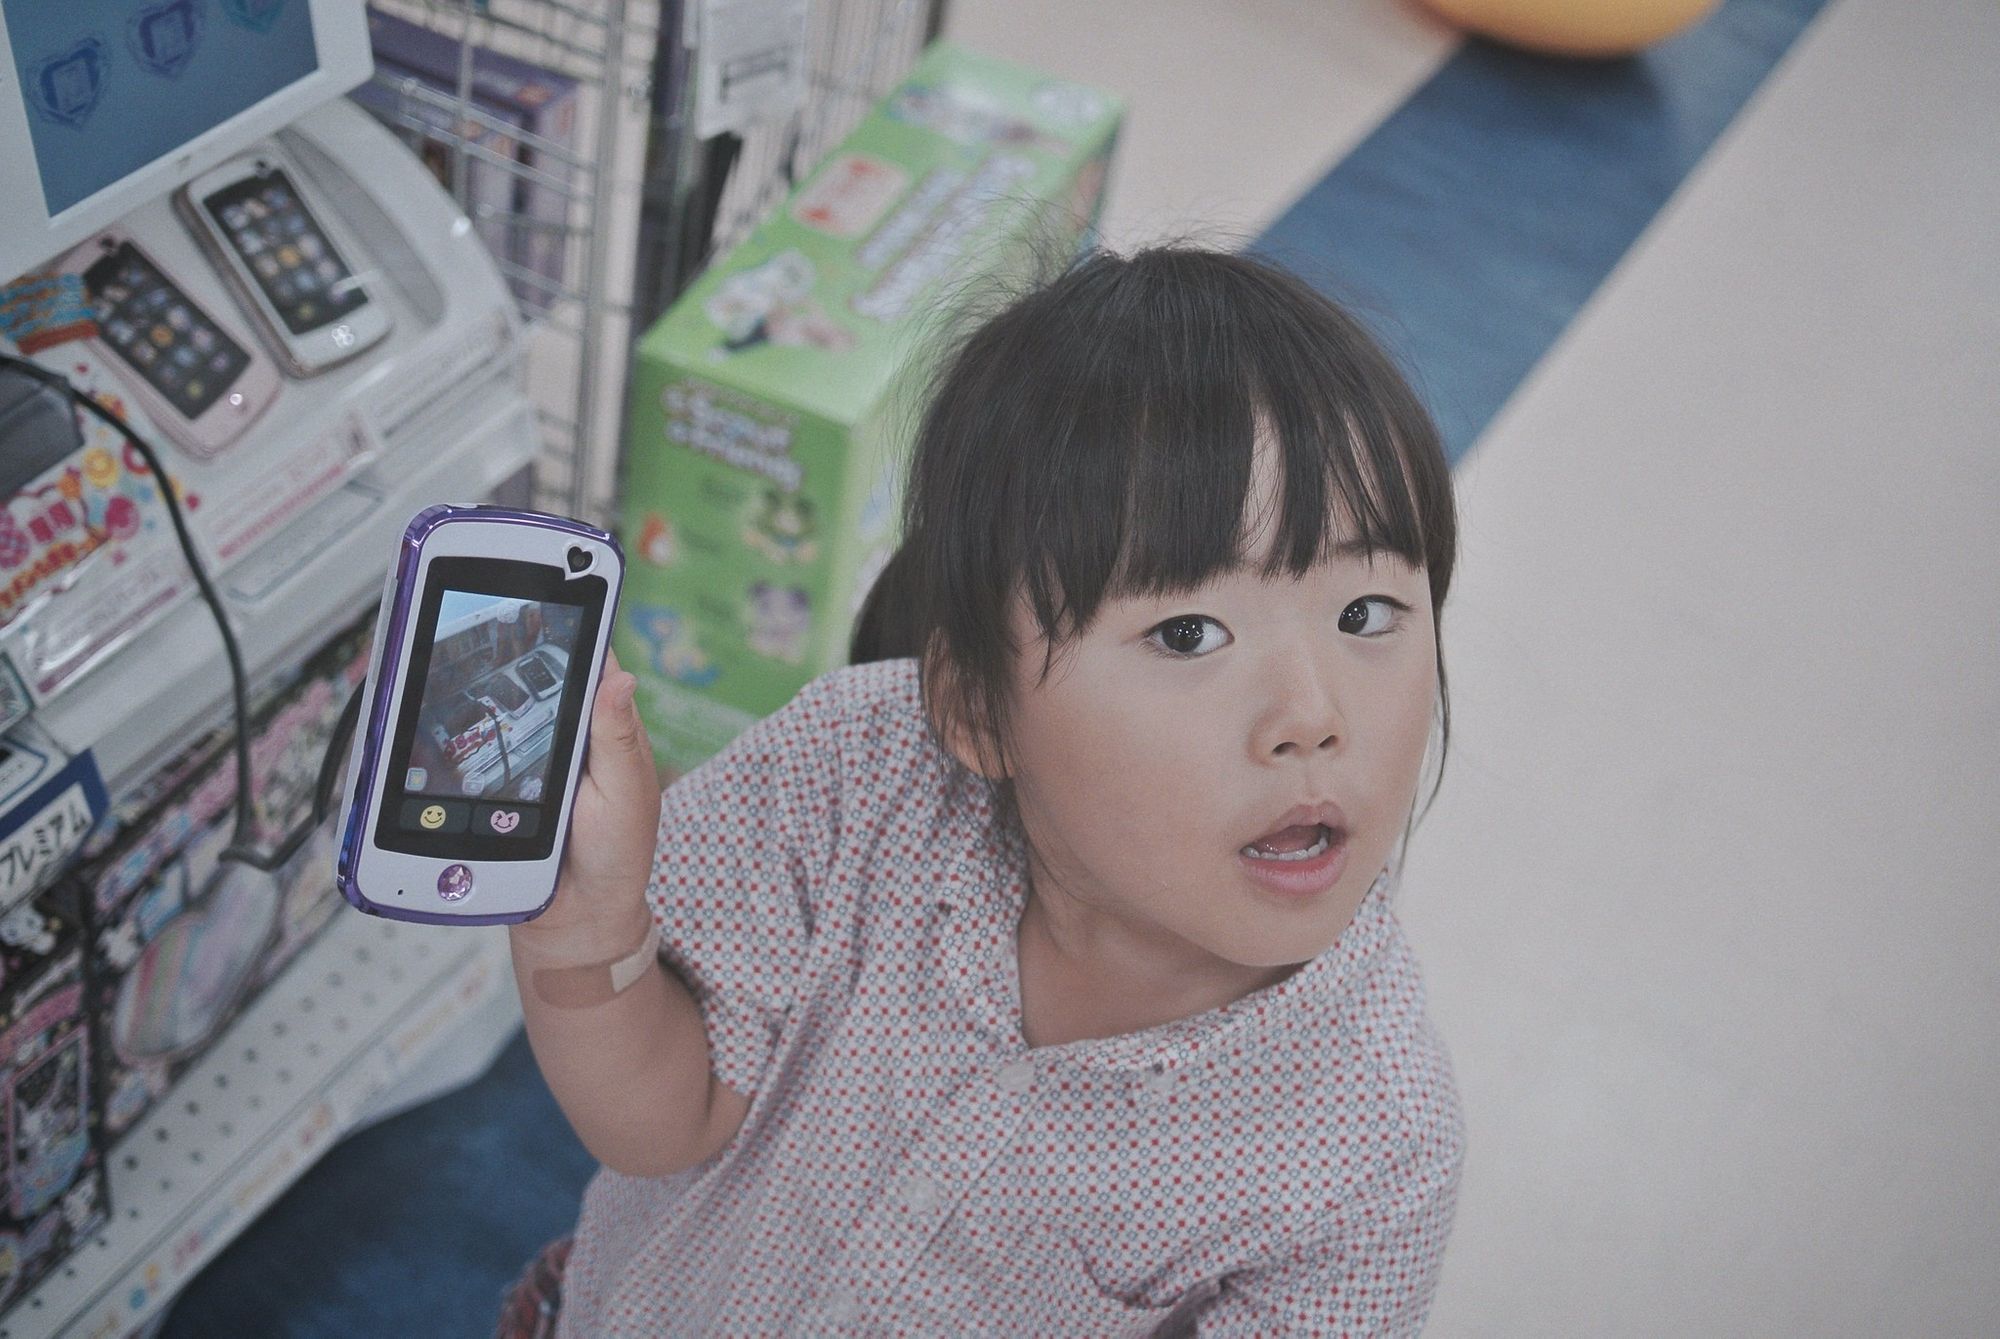 Child on a Smartphone